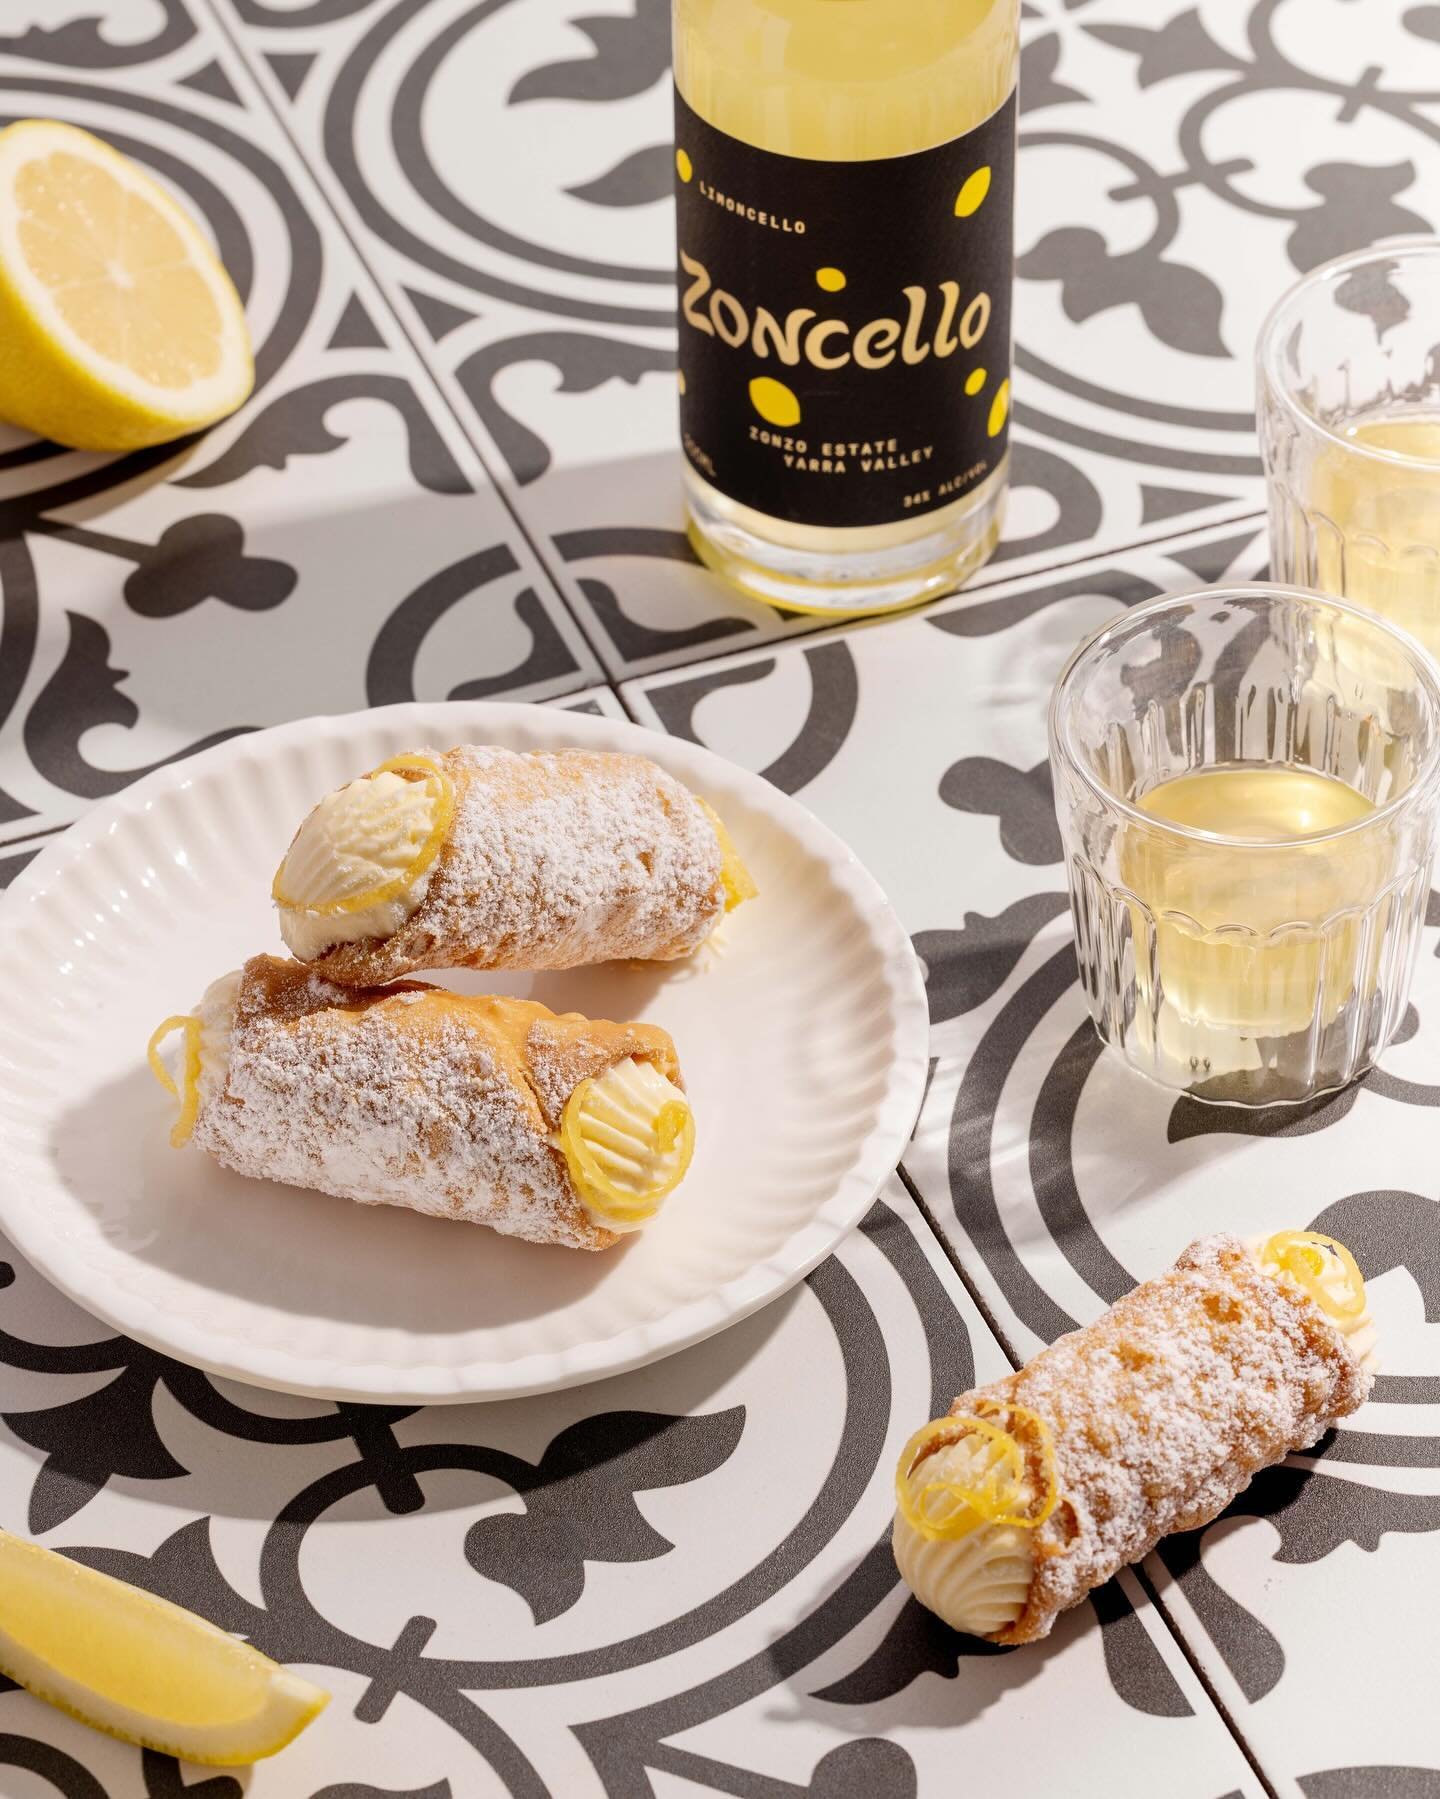 New work featuring delicious cannoli from @lamannamelbourne @lamannapatisserie&rsquo;s new range with @zoncello.official @zonzoestate 💛

#melbournefoodphotographer #zonzo #zonzoestate #zoncello #foodphotography #cannoli